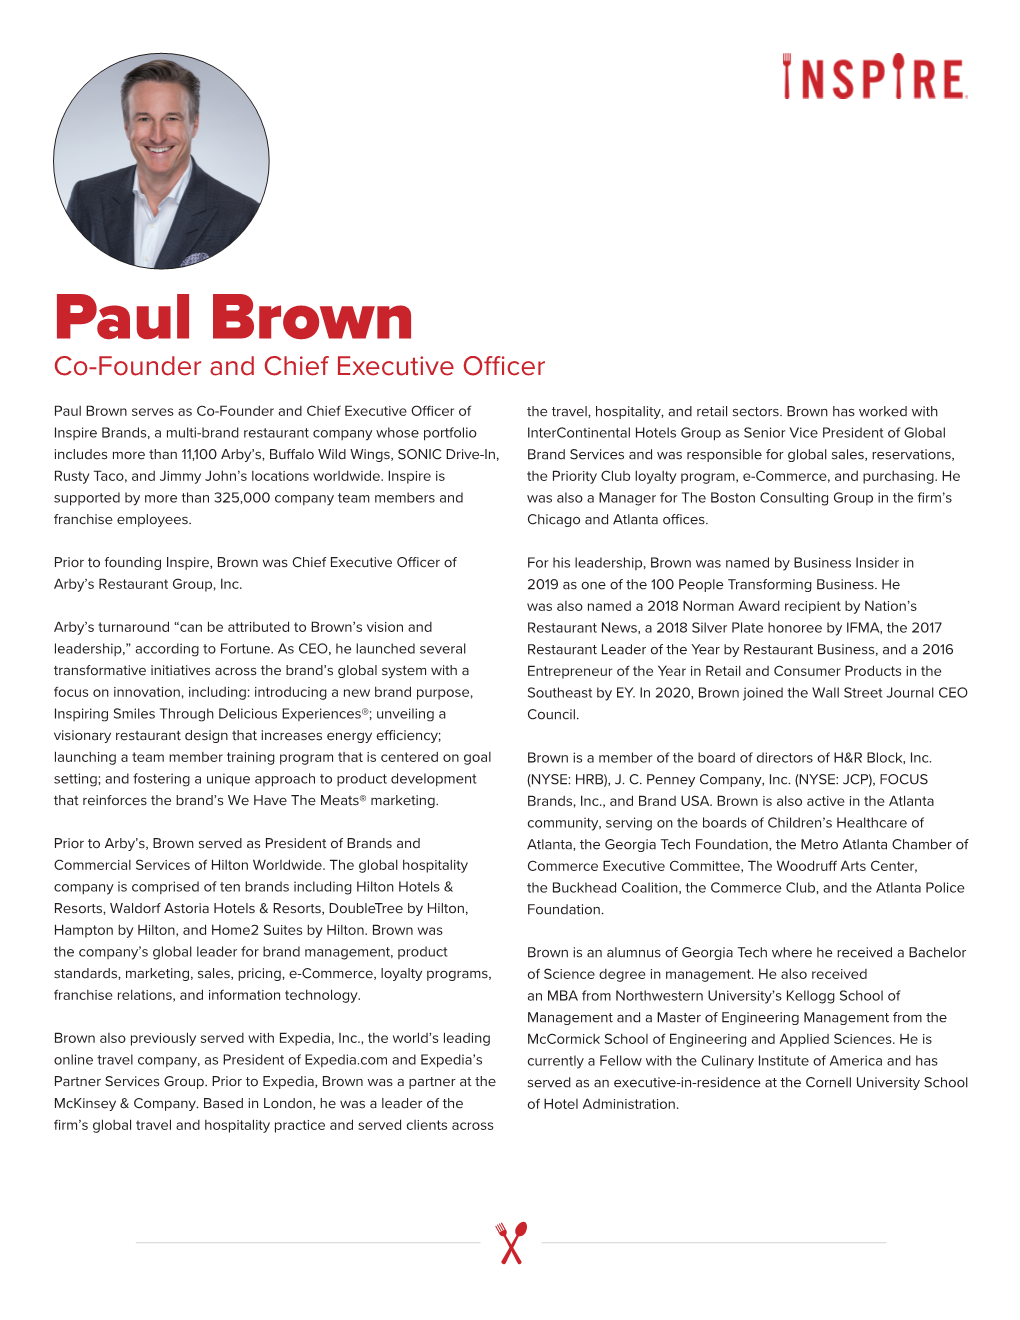 Paul Brown Co-Founder and Chief Executive Officer